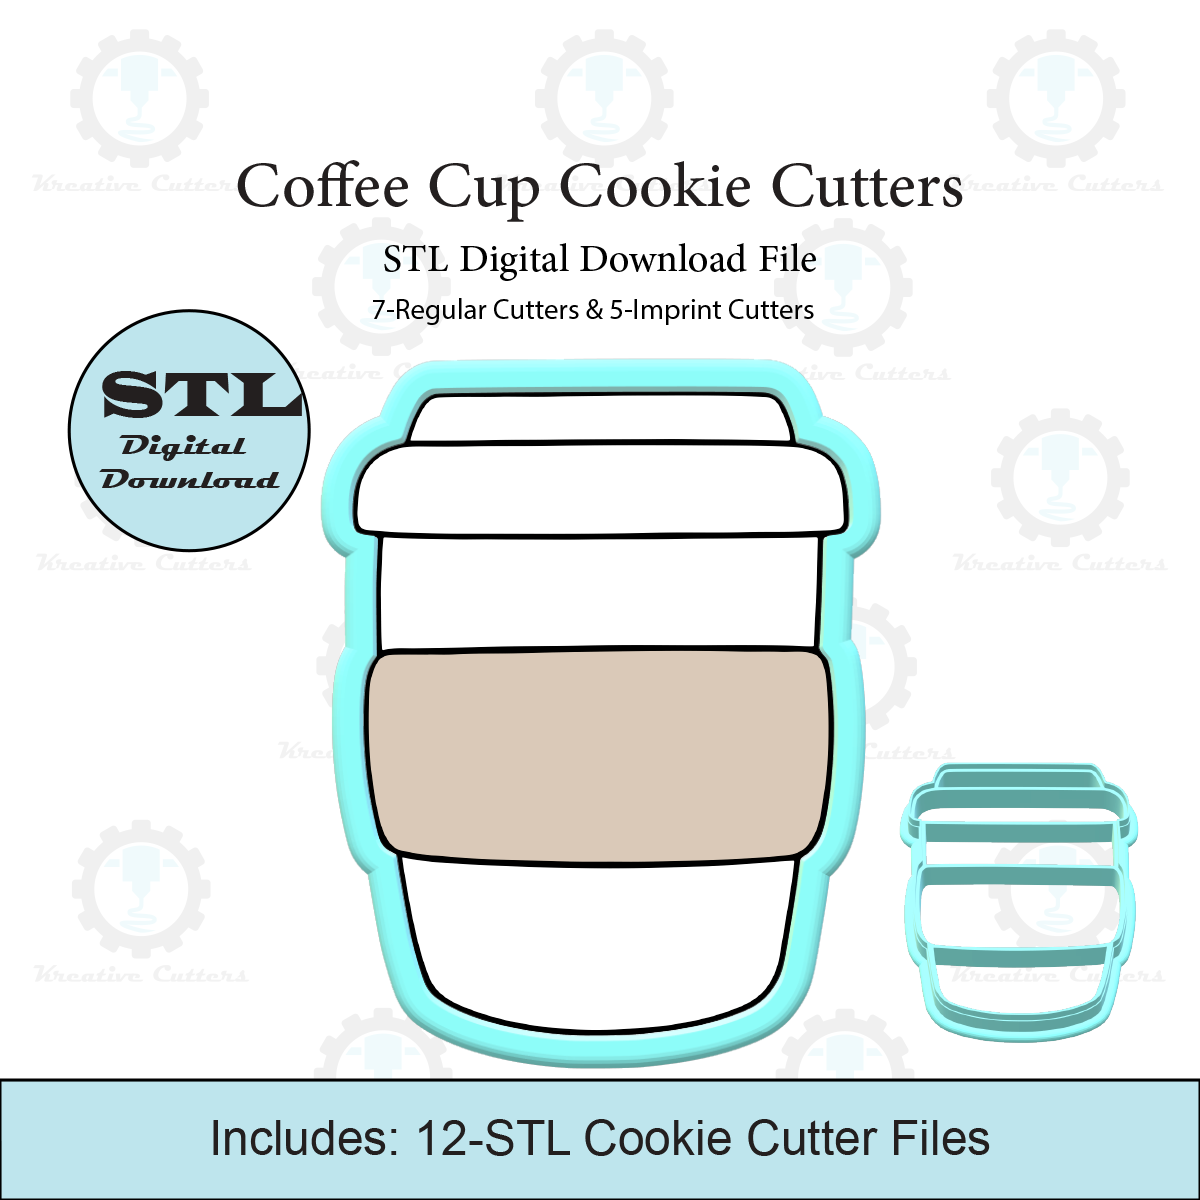 Coffee Cup Cookie Cutters | Standard & Imprint Cutters Included | STL Files